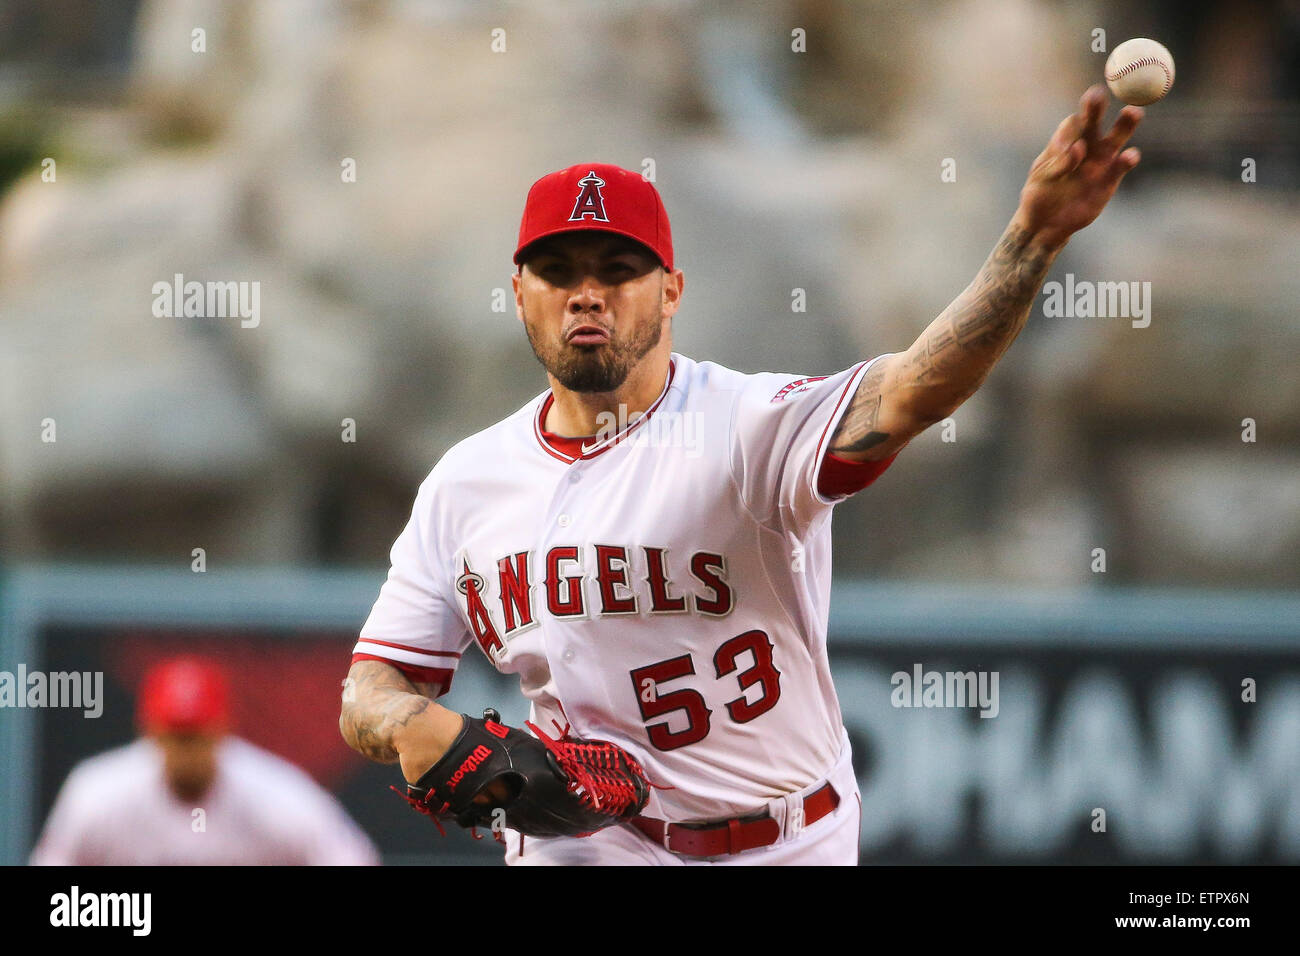 June 12 2015: Los Angeles Angels of Anaheim Pitcher Hector Santiago (53) [8935] pitches pitches for the Angels in the game between the Oakland A's and Los Angeles Angels of Anaheim, Angel Stadium in Anaheim, CA, Photographer: Peter Joneleit Stock Photo